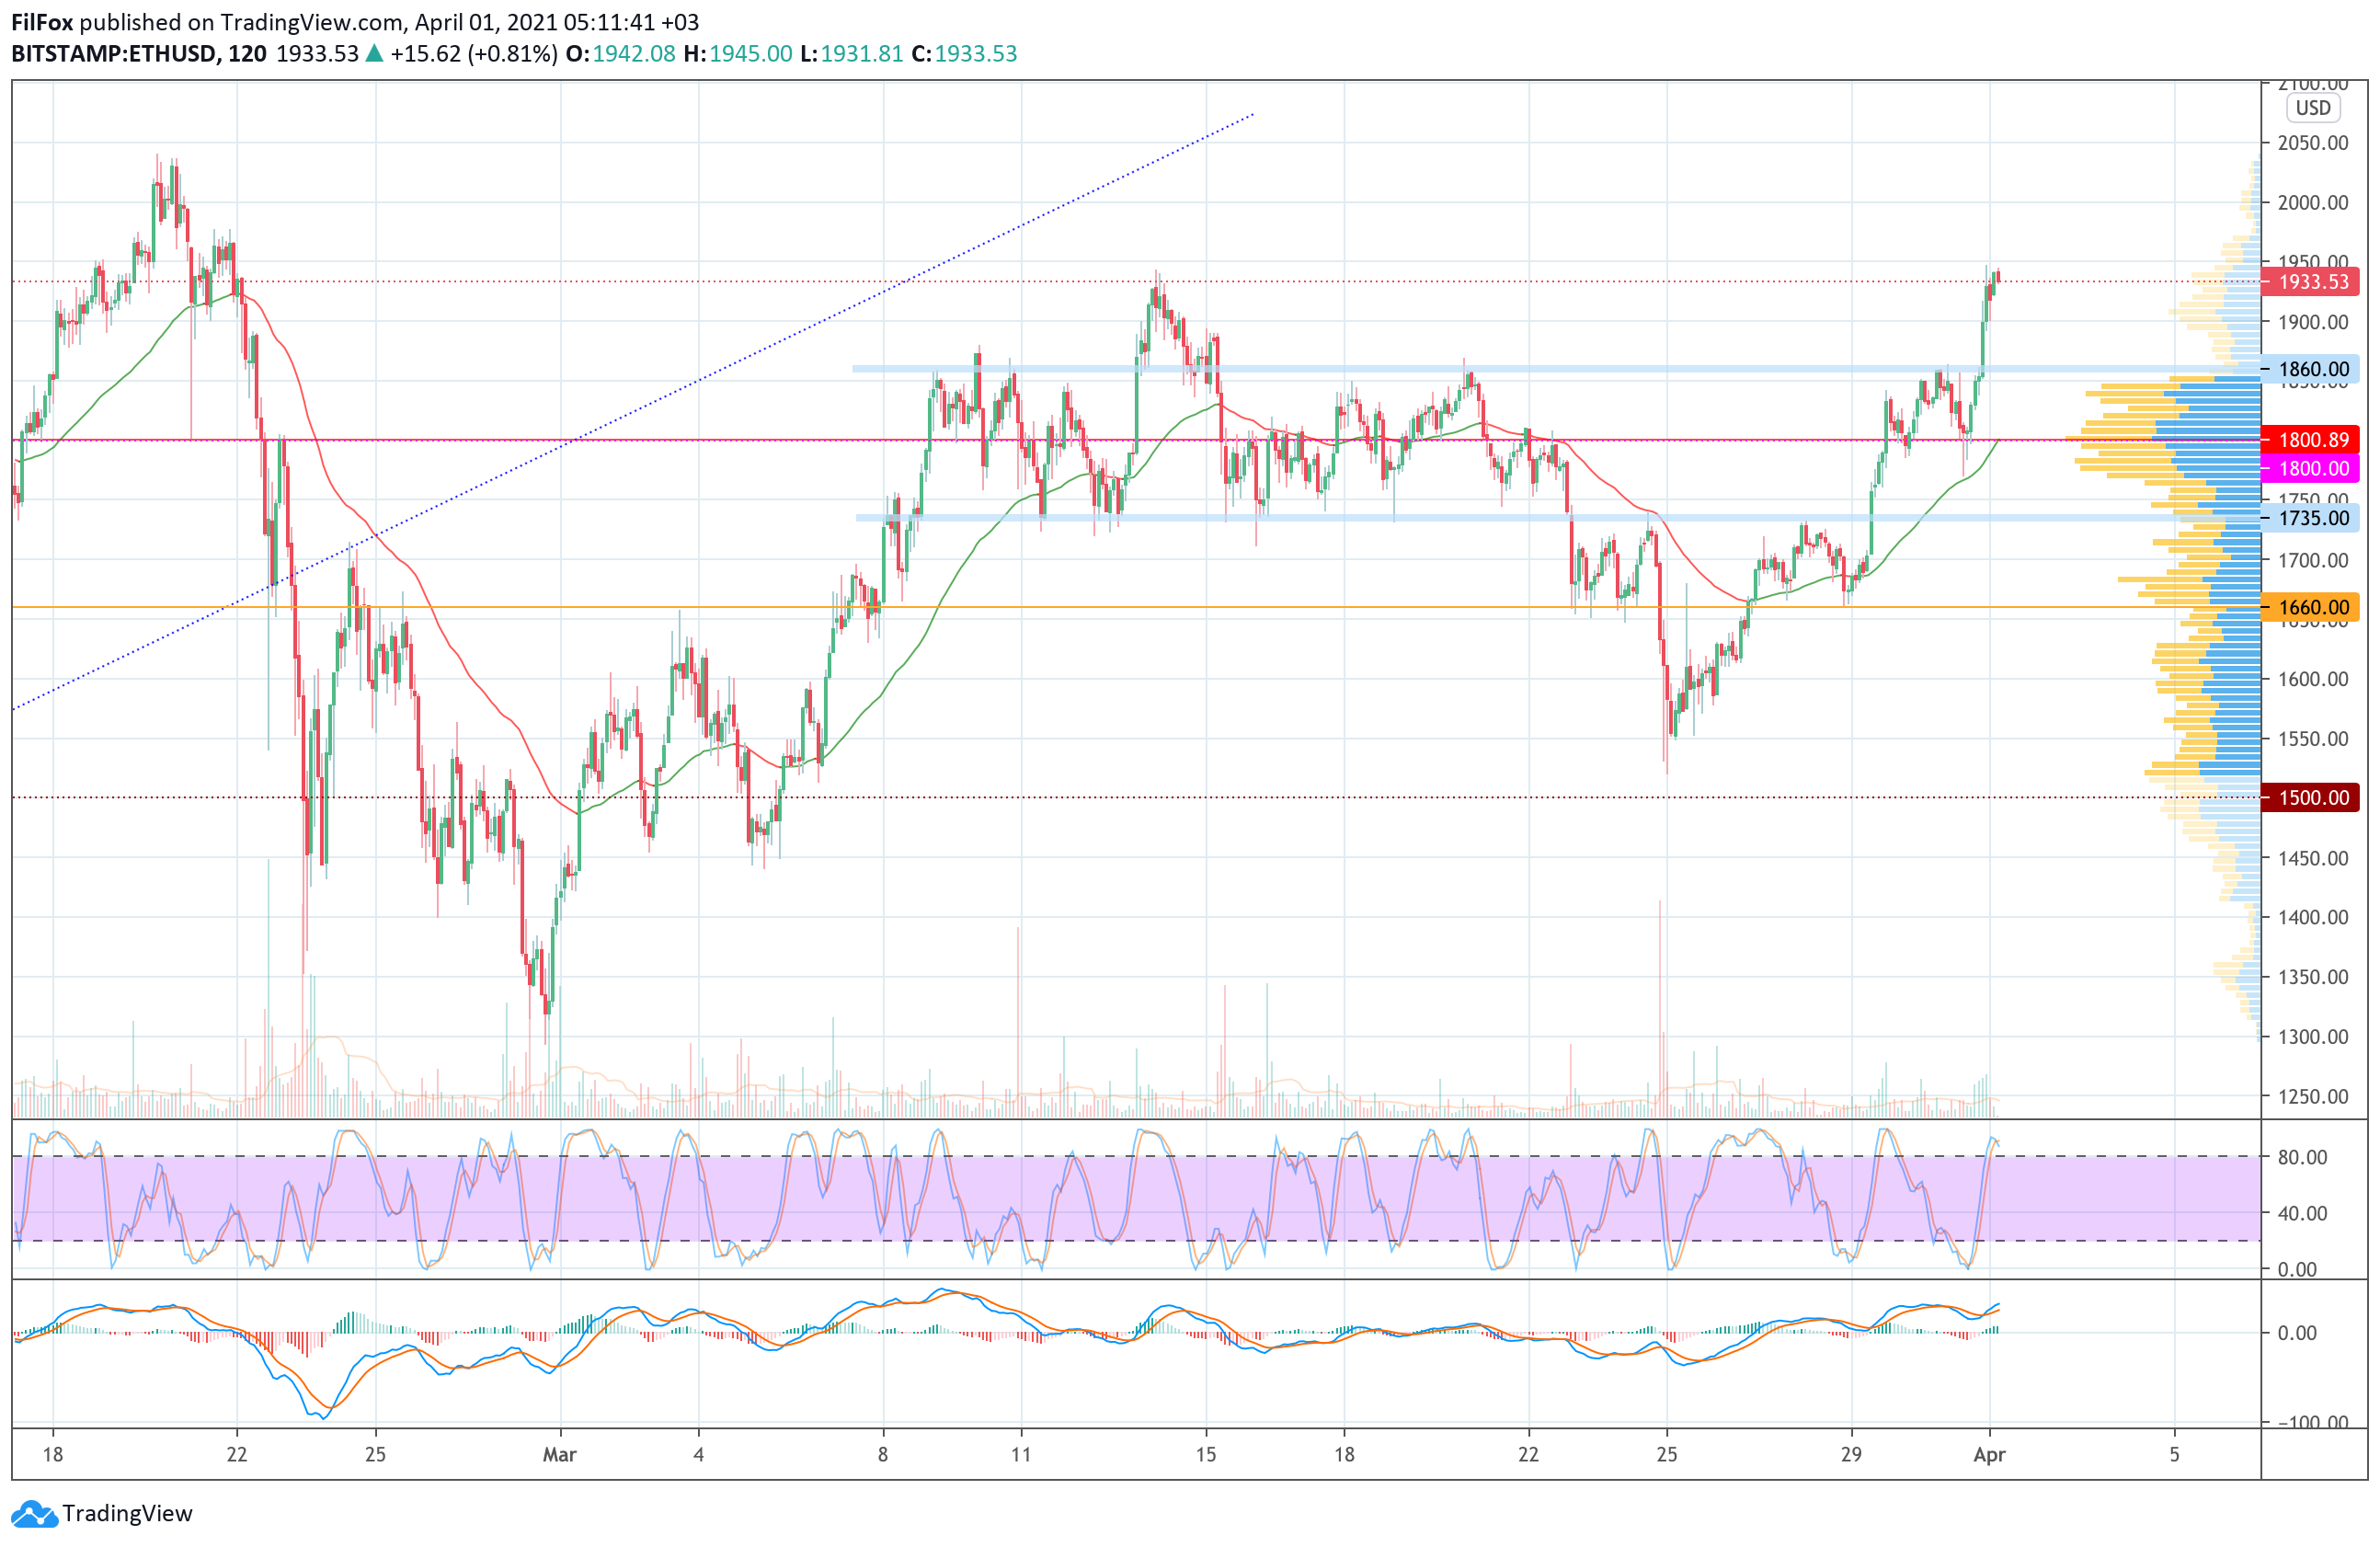 Analysis of the prices of Bitcoin, Ethereum, XRP for 04/01/2021